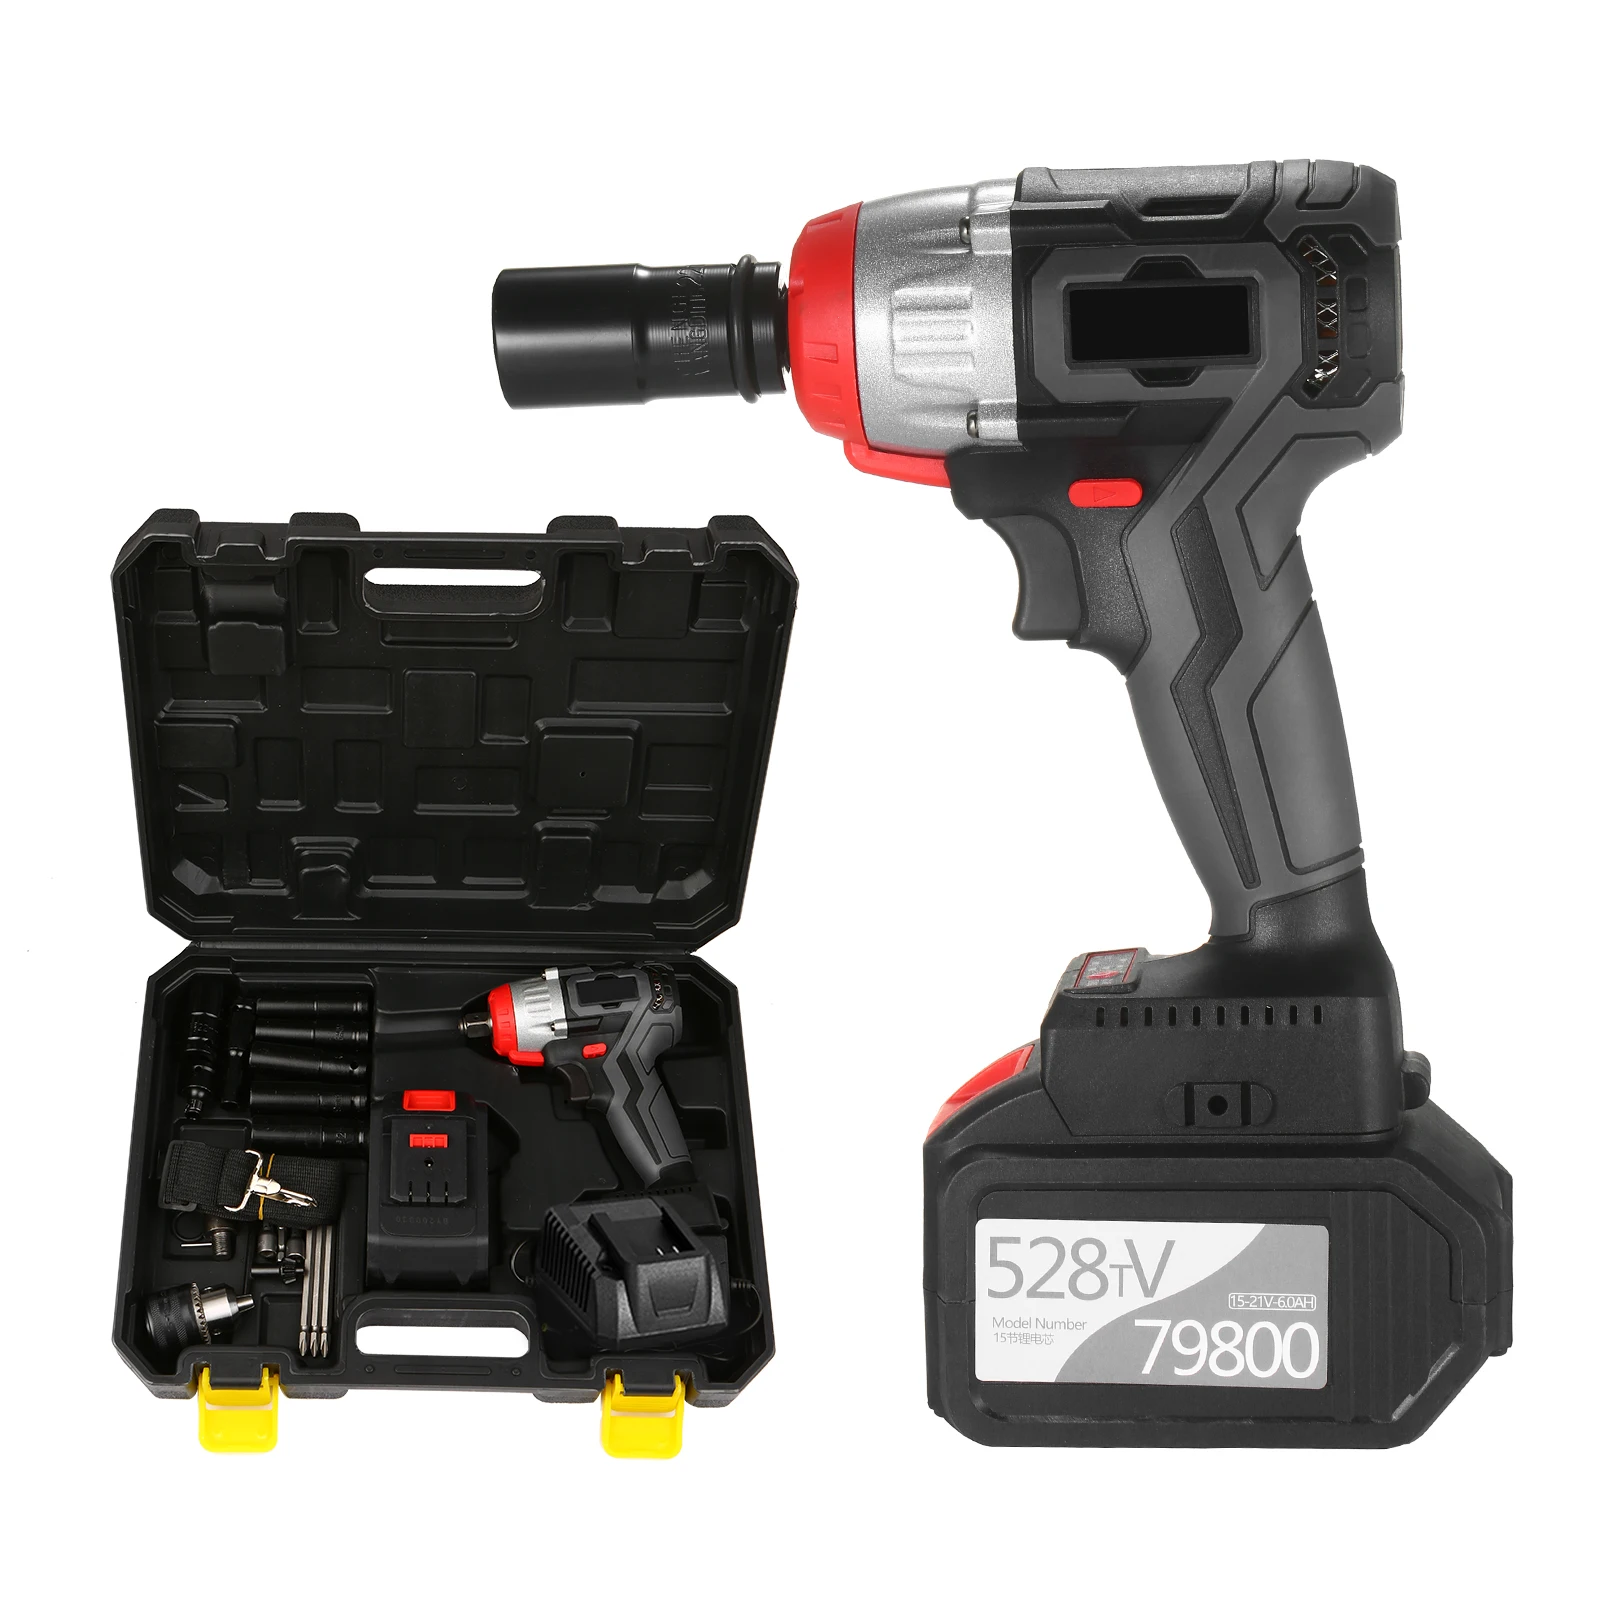 Cordless Impact Wrench 380Nm Torque Brushless Motor Quick Chuck 2x6.0A Fast Charger Variable Speed Multifunction Impact Kit